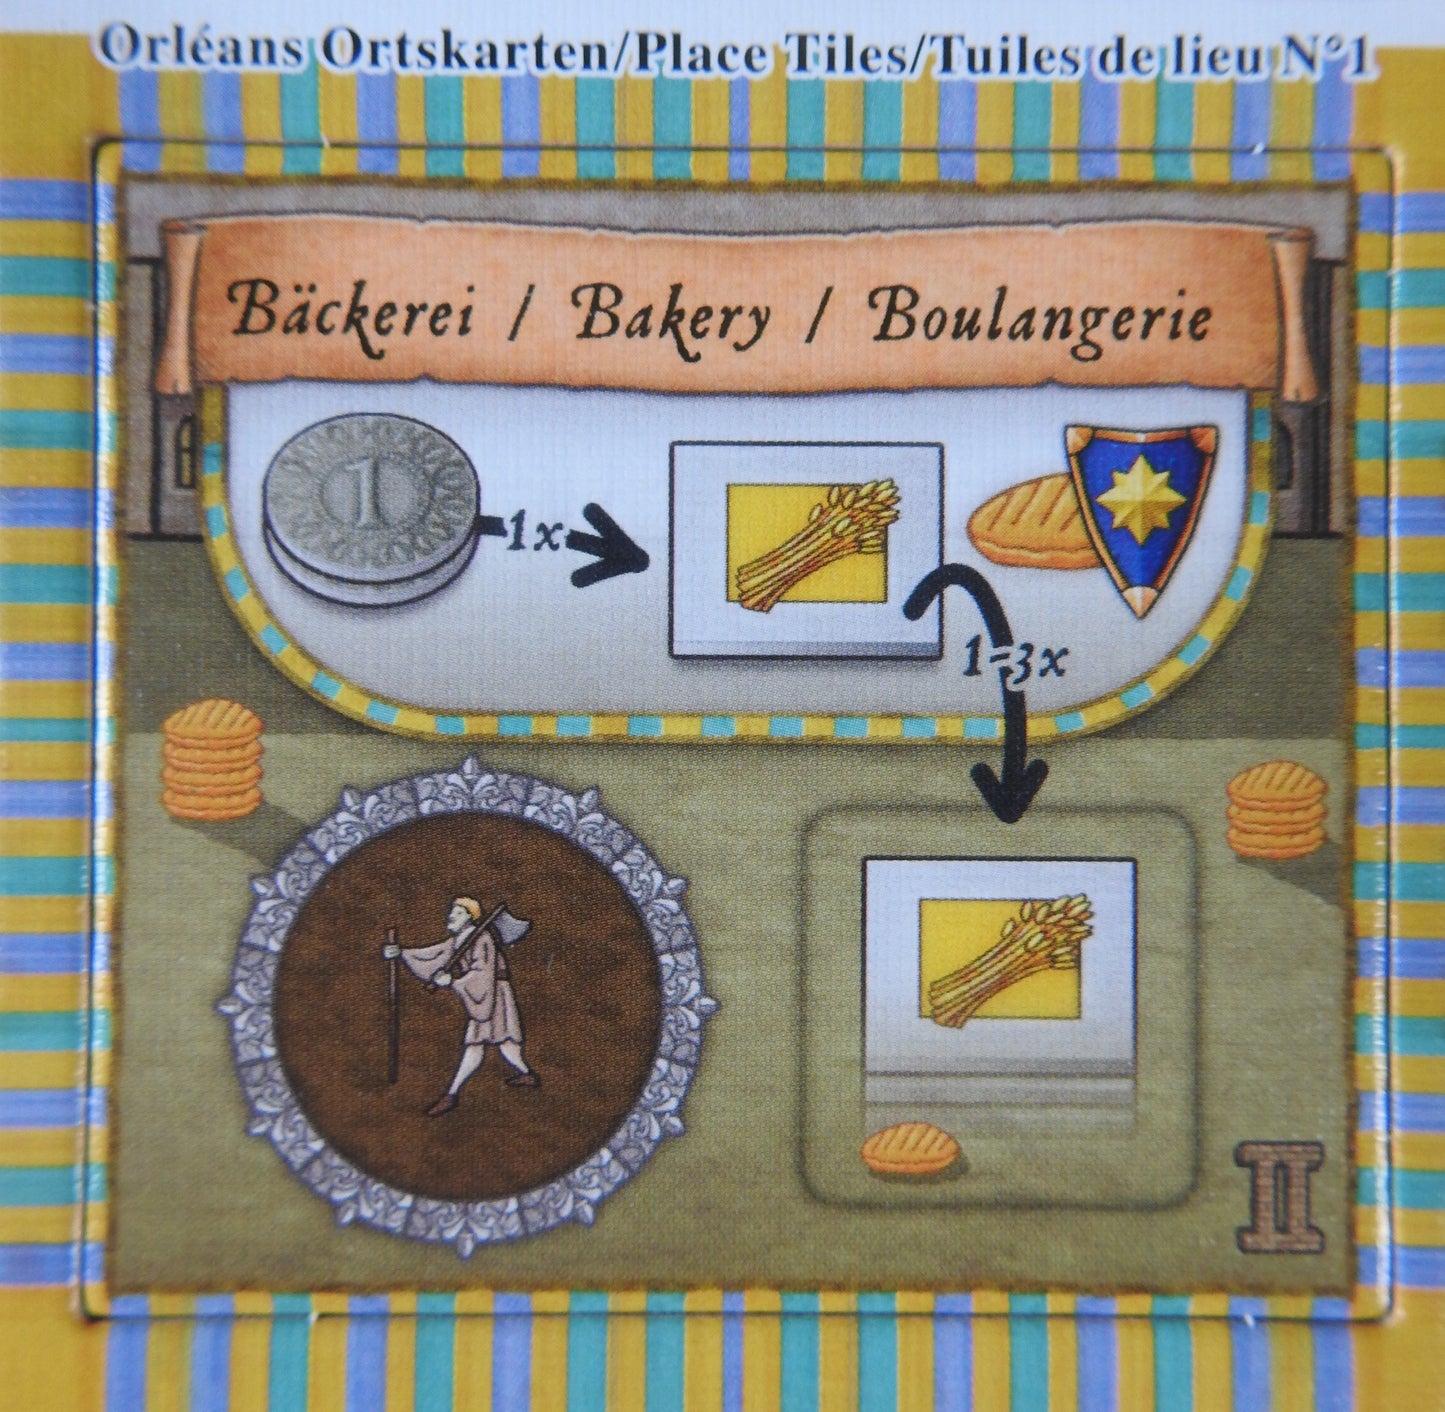 Close-up view of the Bakery place tile.